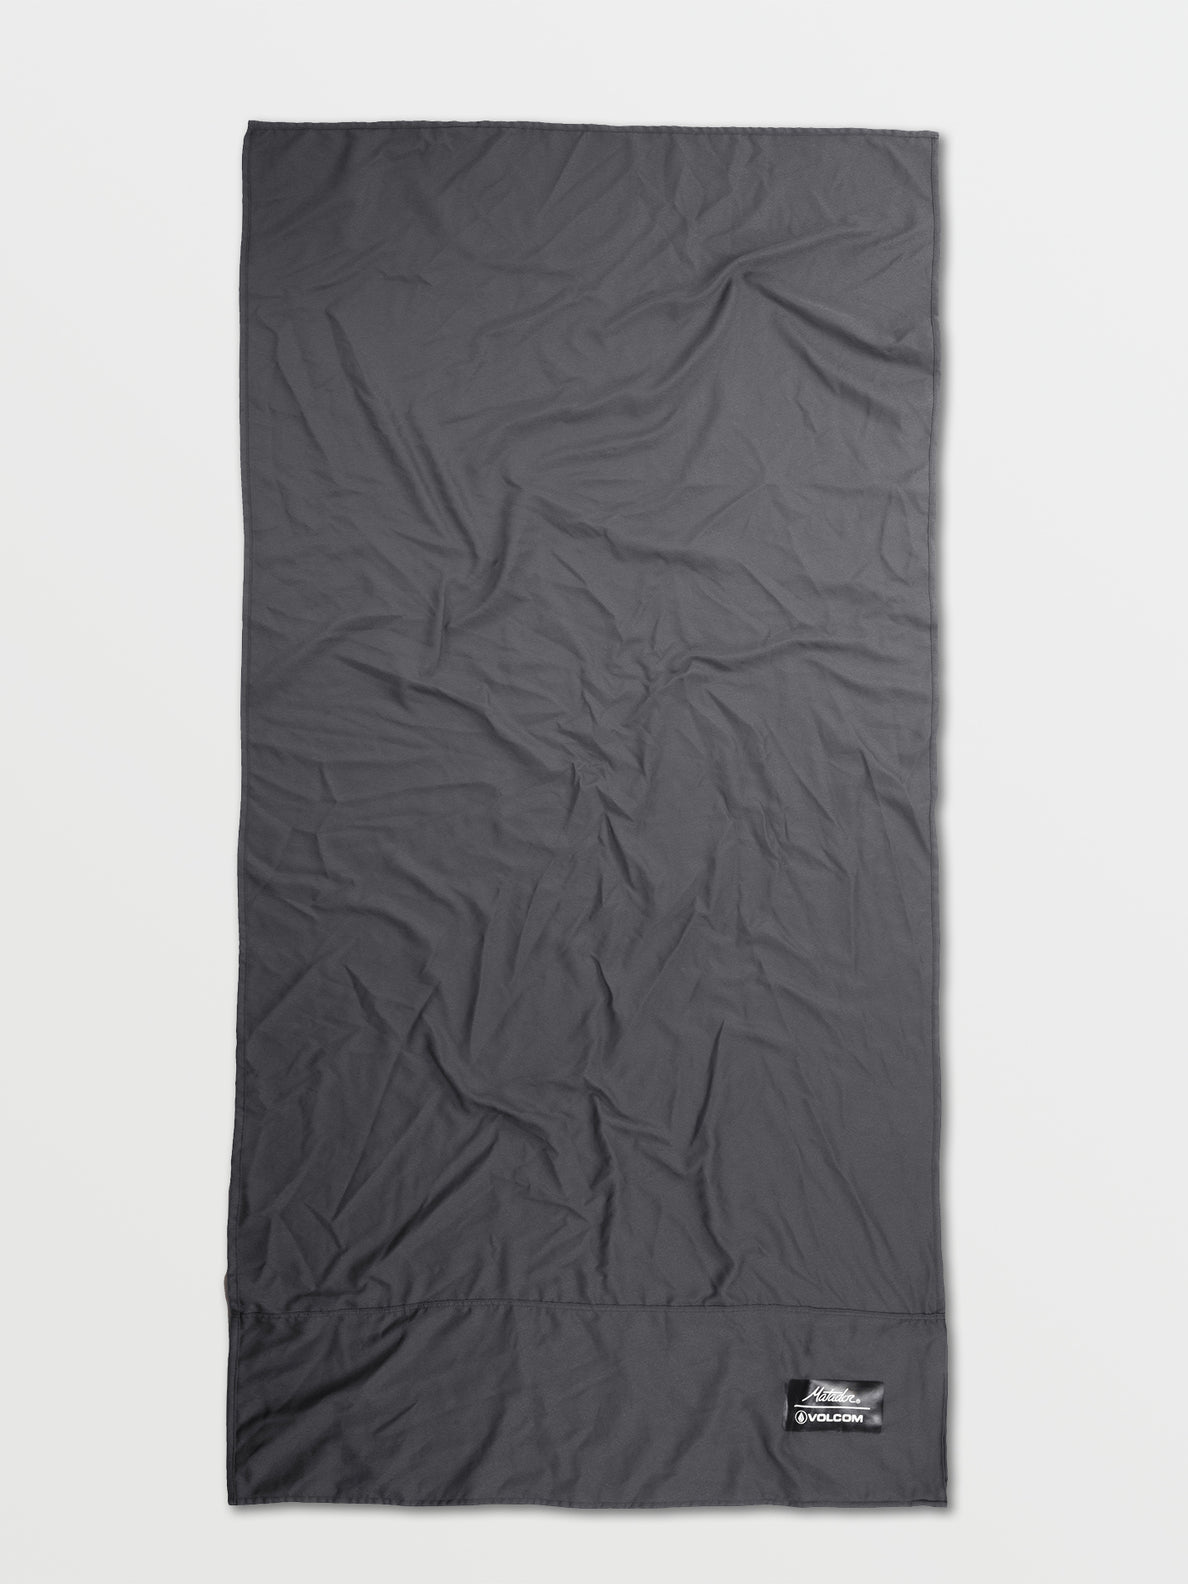 Volcom X Matador Packable Towel Poncho - Sustainable Camping, Surf an,  79,95 €